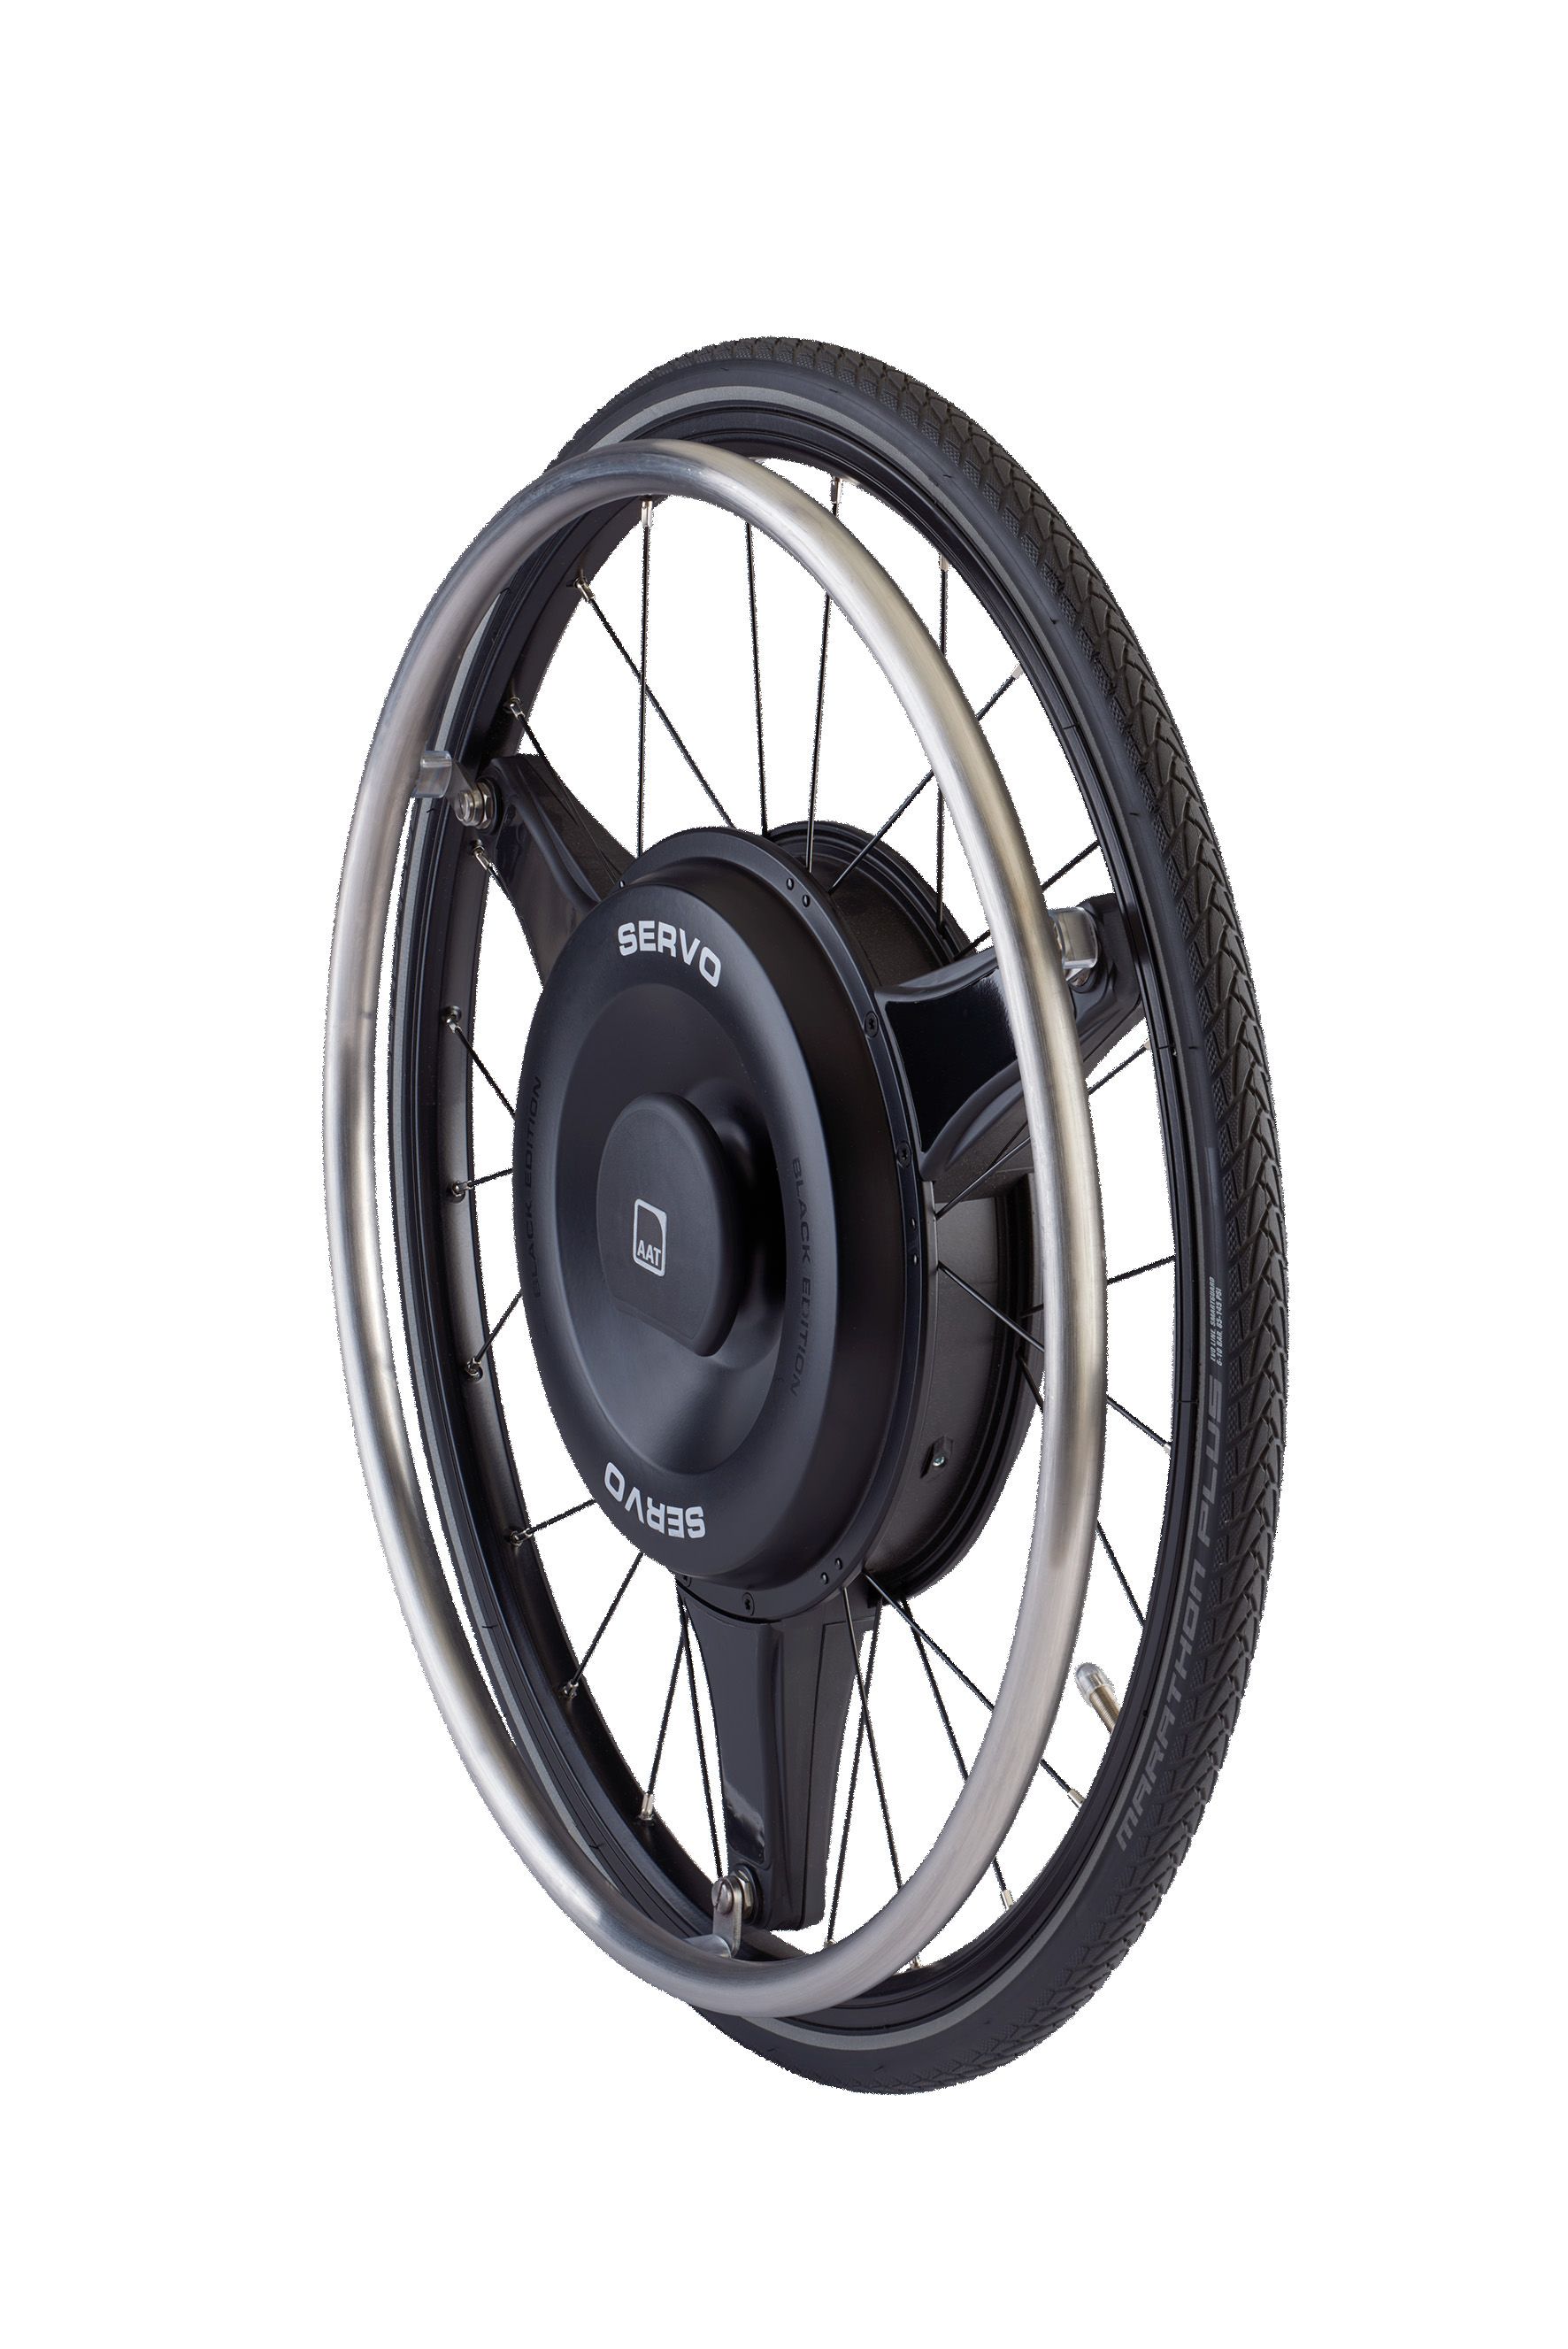 The picture shows the SERVO drive wheel on a white background. It is a black plain wheel hub drive with silver spokes and a black wheelchair tire.